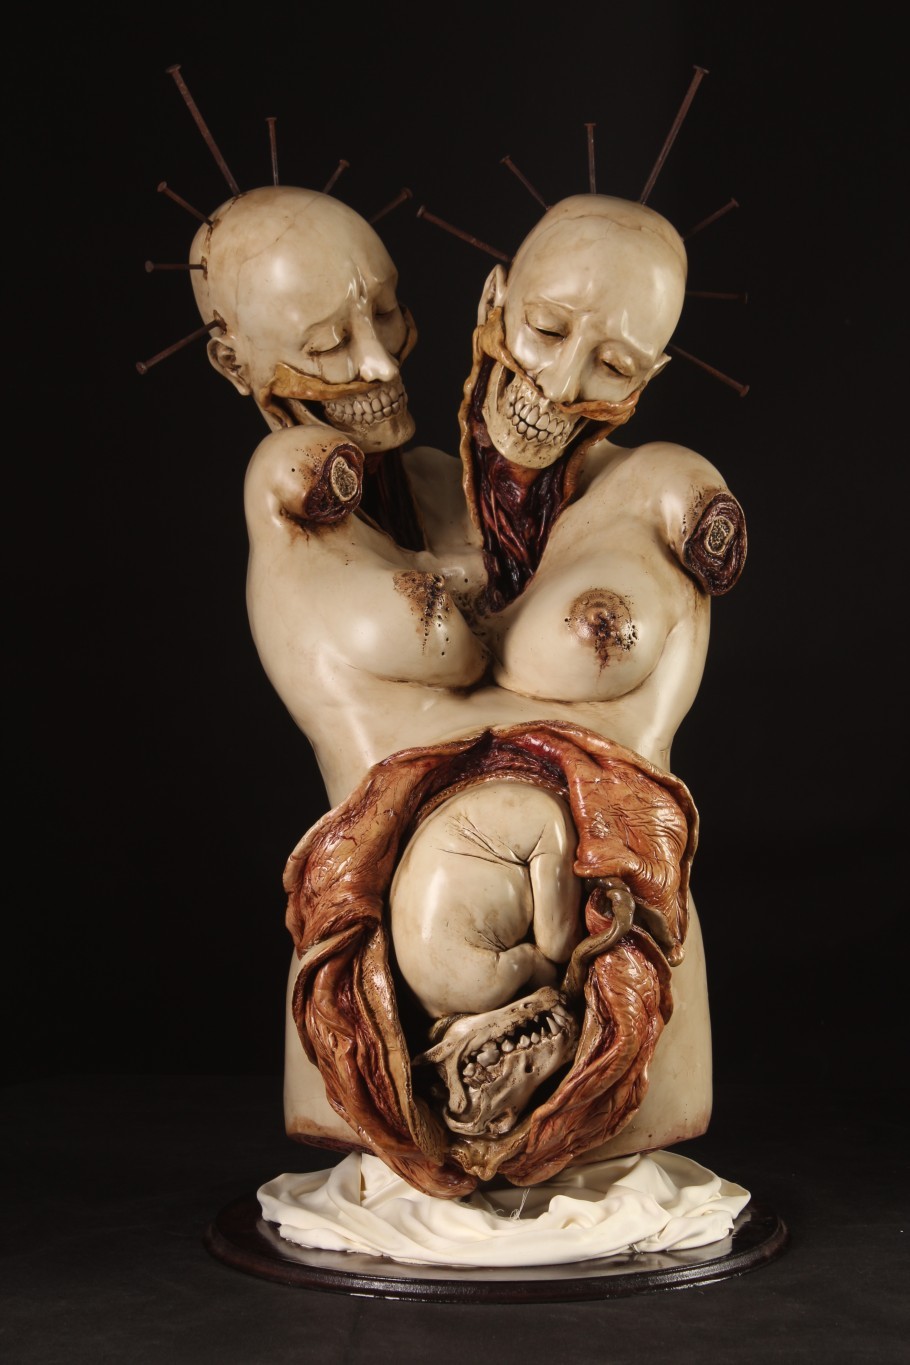 thecommunionband:
“ Emil Melmoth, “Study Of Death”, ceramic sculpture, 32 x 18 x 20 inches
http://www.lastritesgallery.com/
”